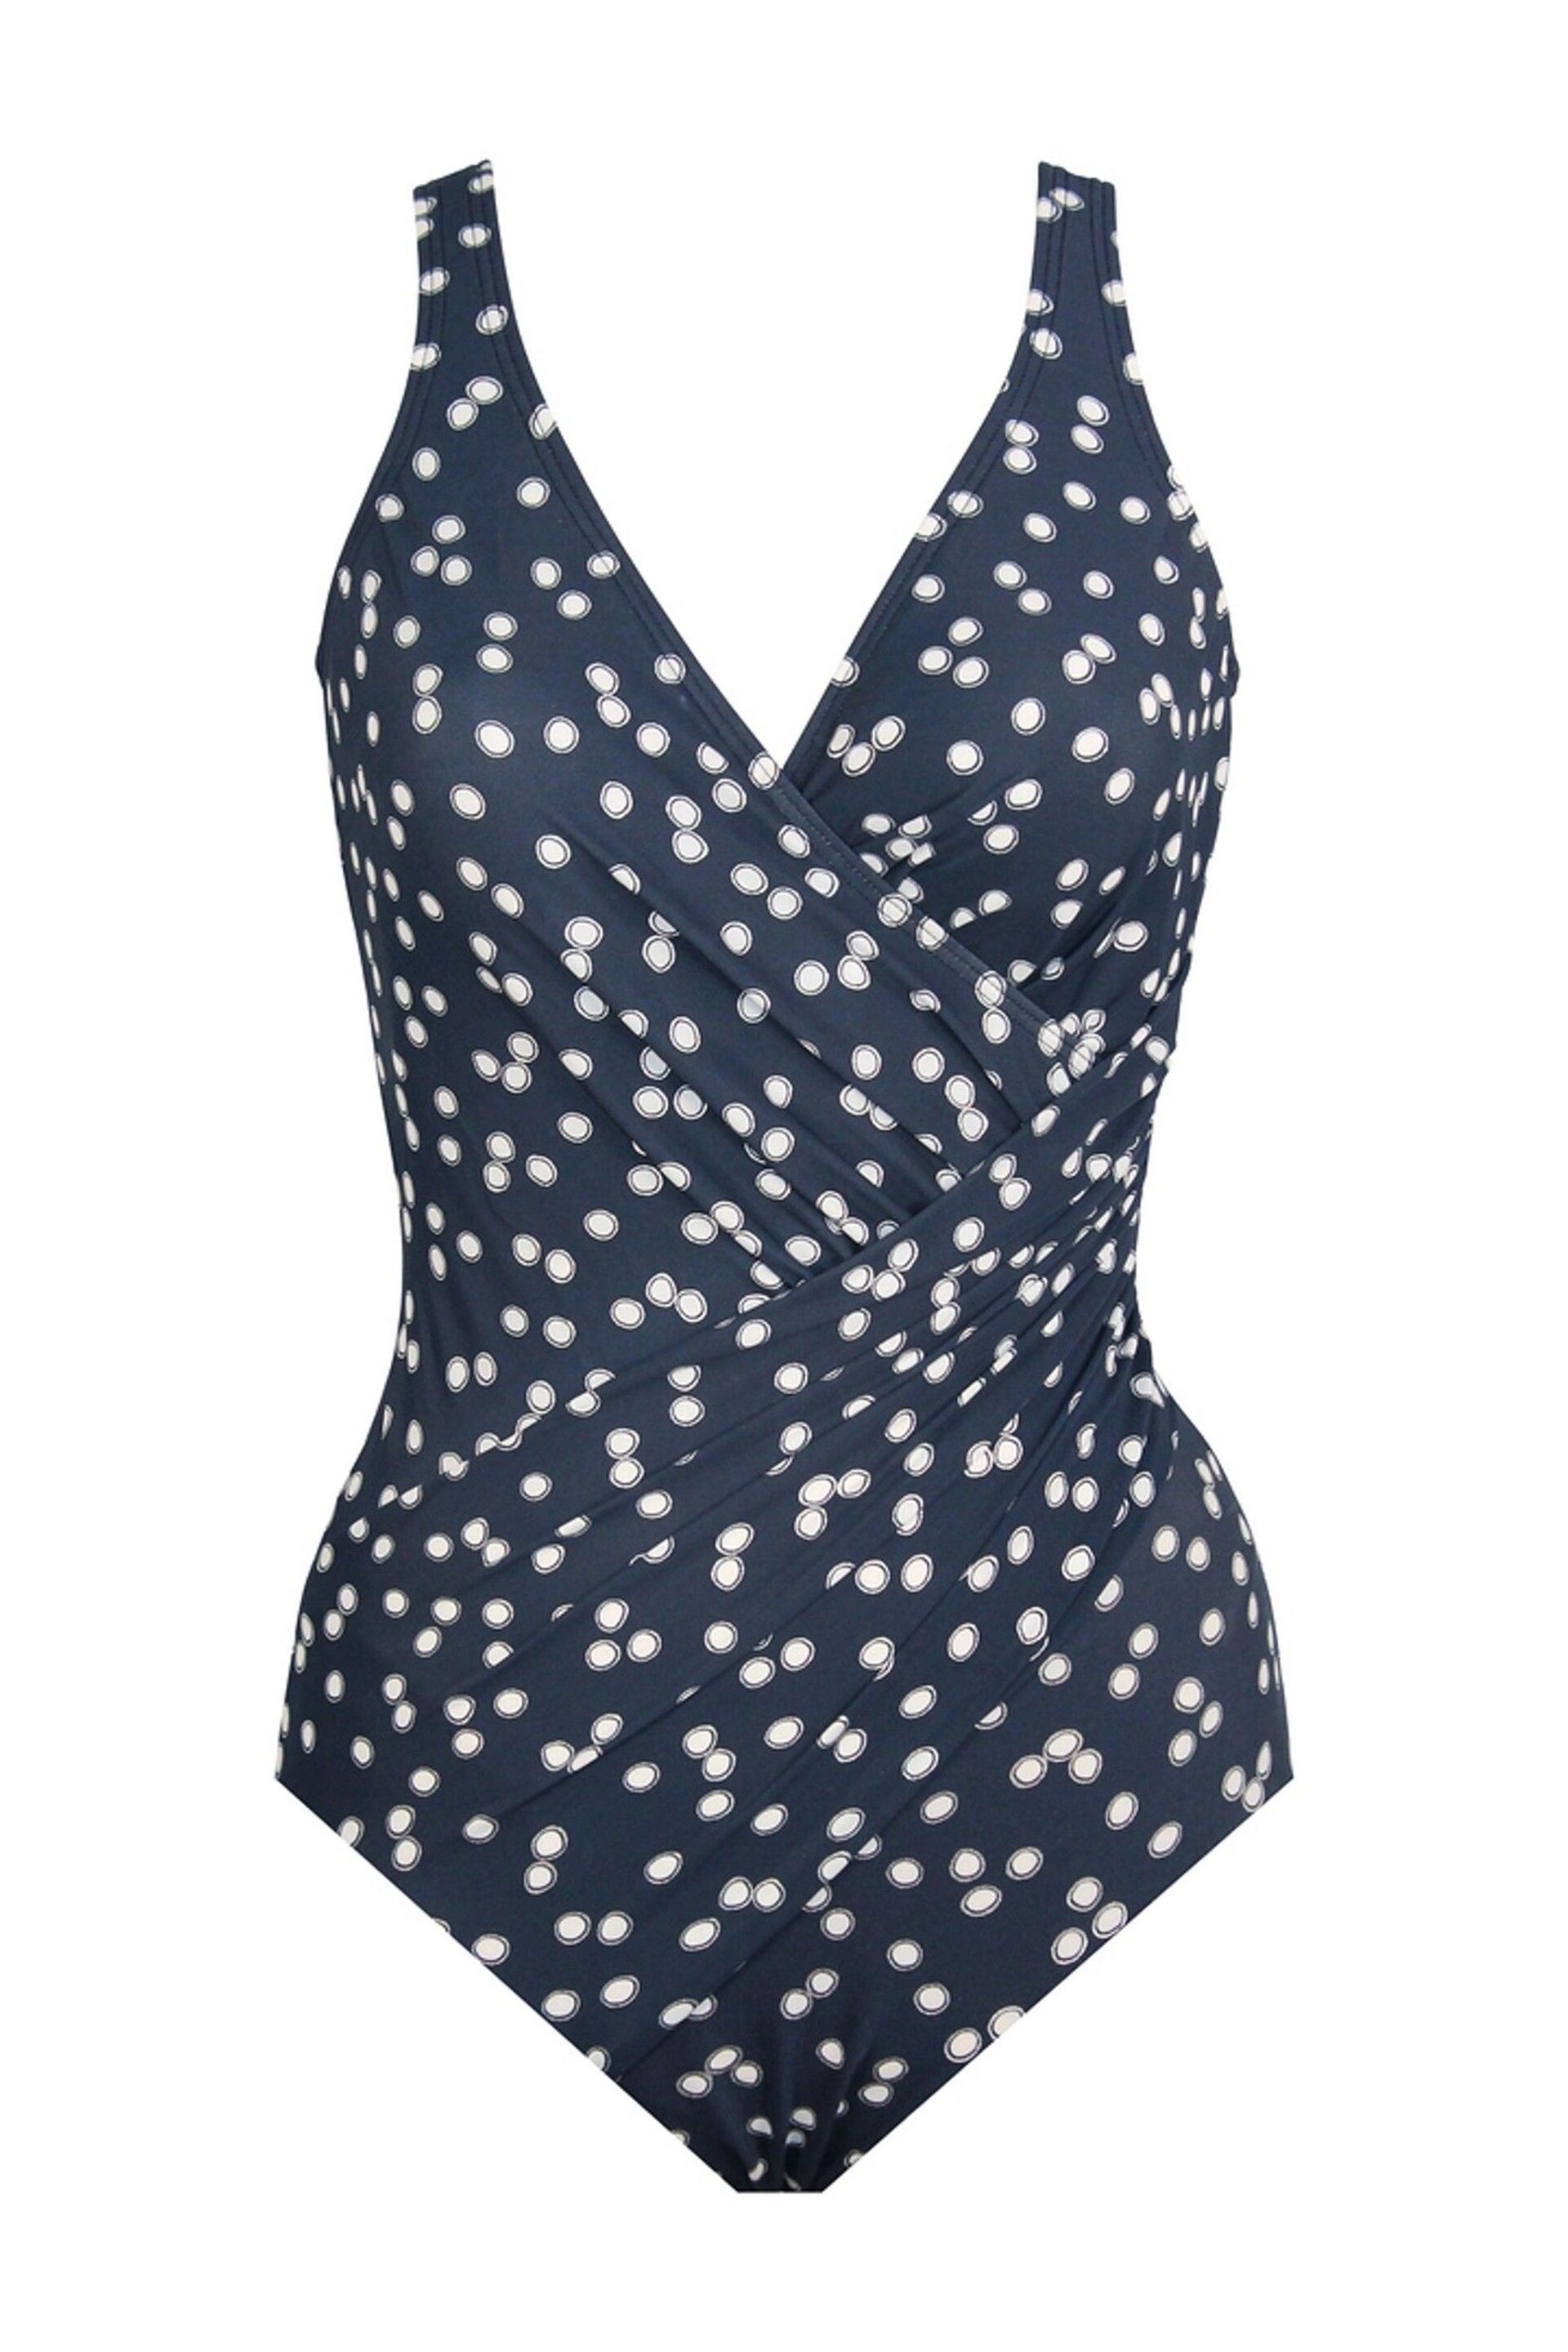 Miraclesuit Navy Oceanus Spot Tummy Control Swimsuit - Image 5 of 5